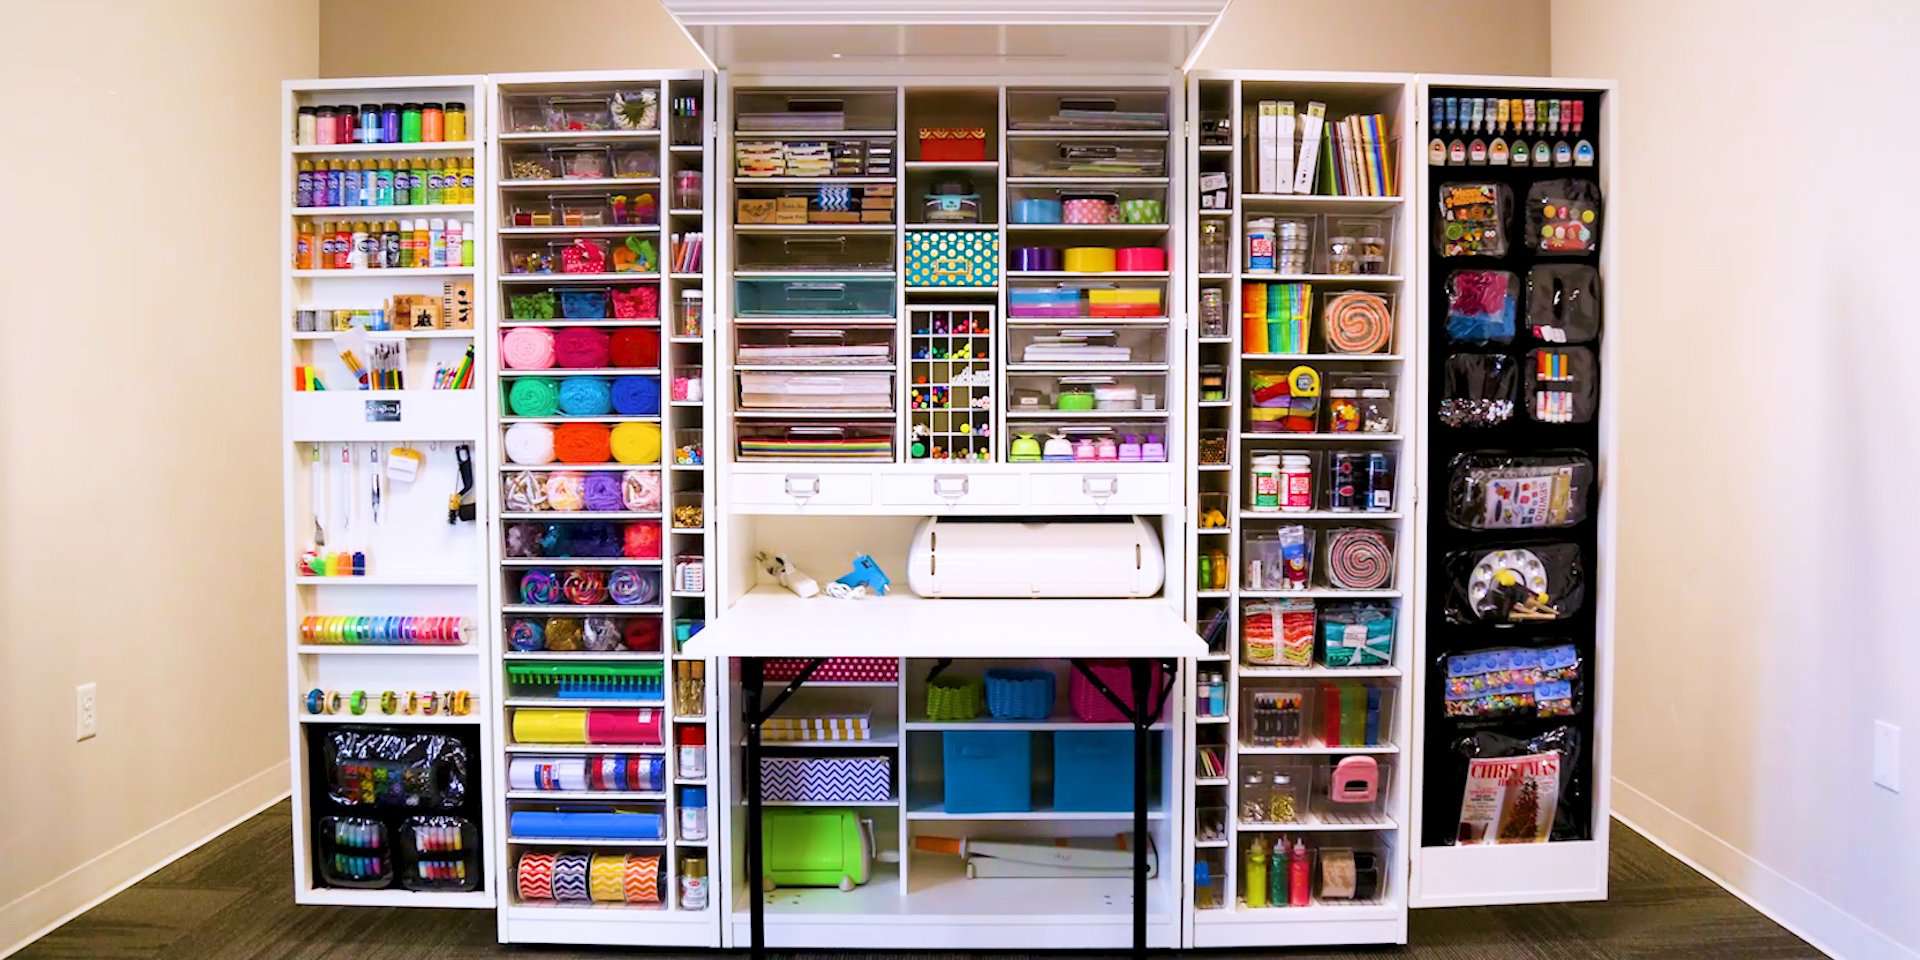 Taboola Ad Example 56478 - 25 Innovative Ways To Organize Your Home